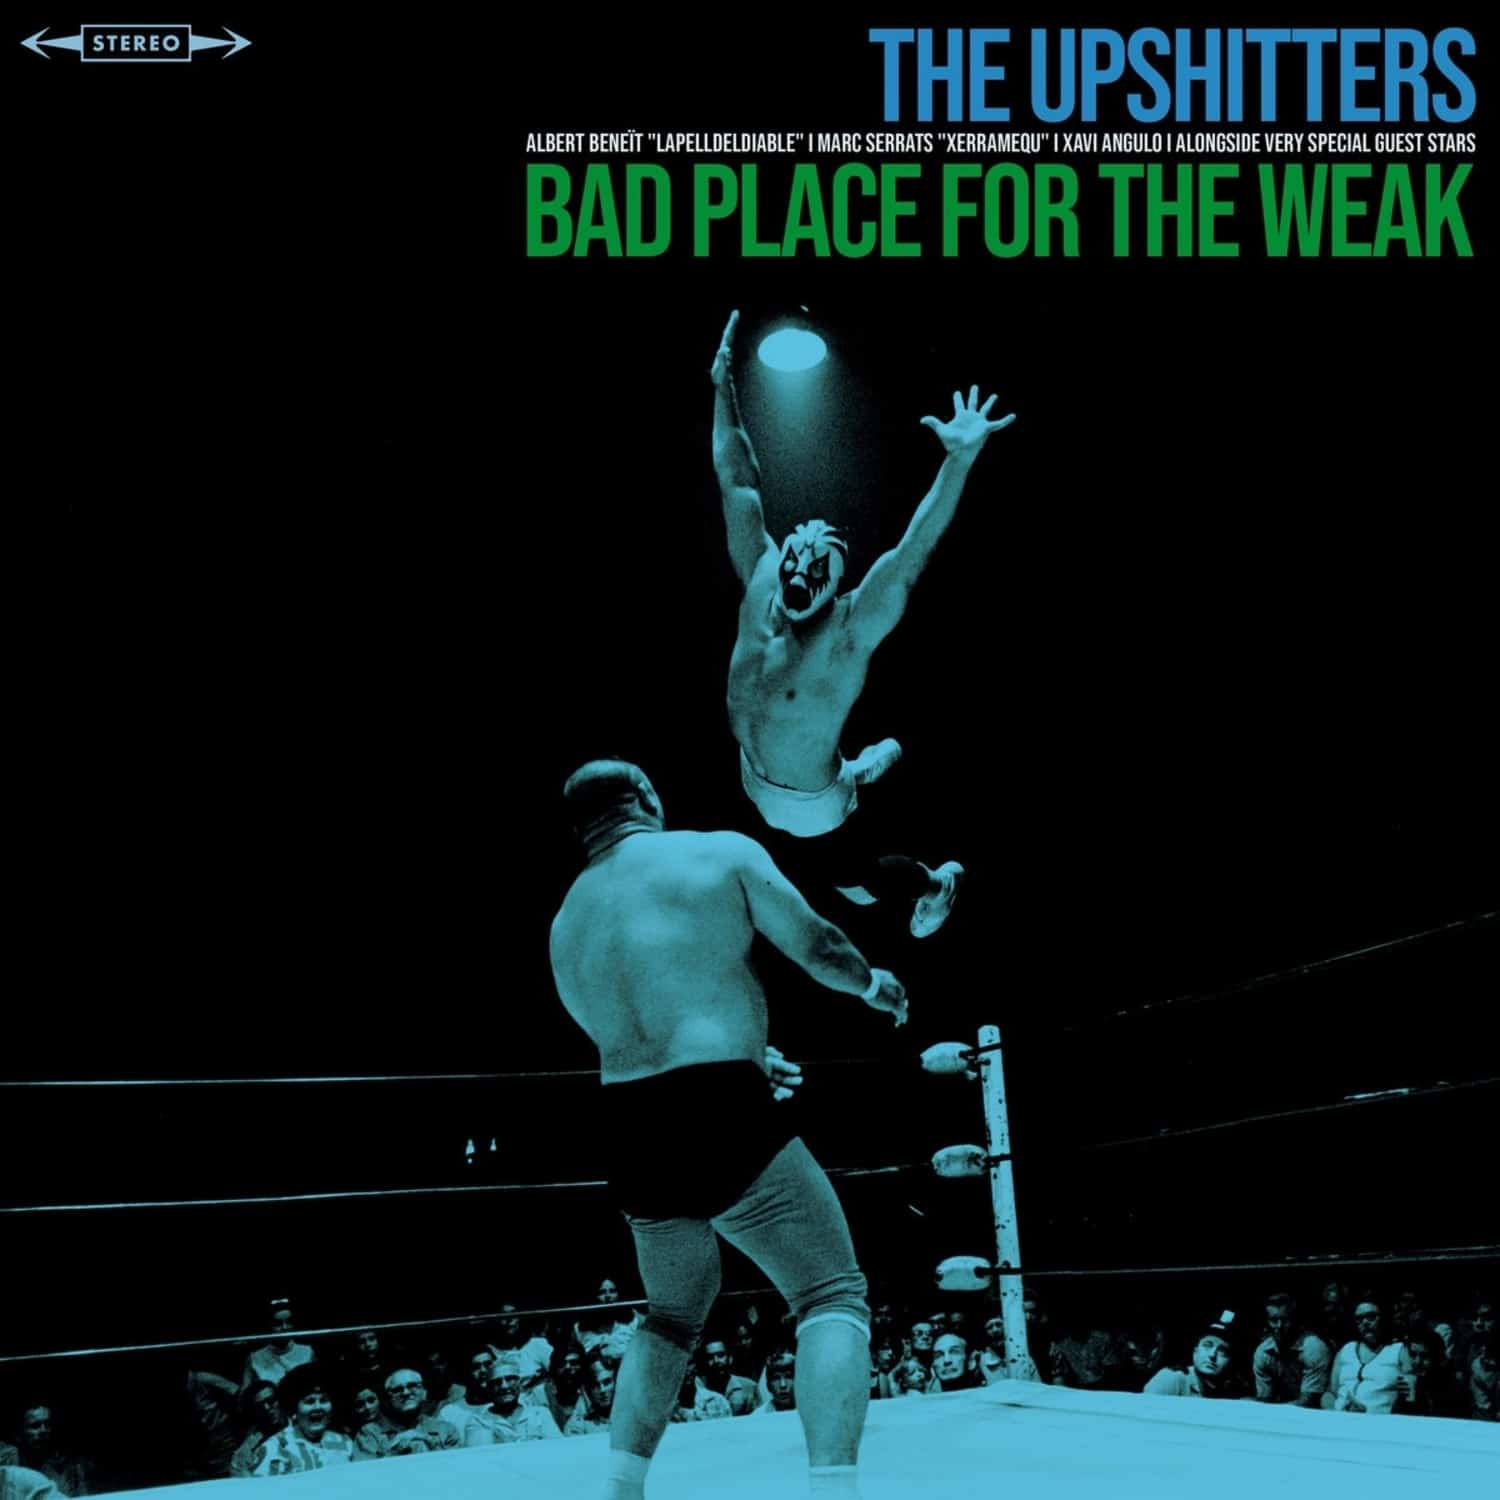  The Upshitters - BAD PLACE FOR THE WEAK 